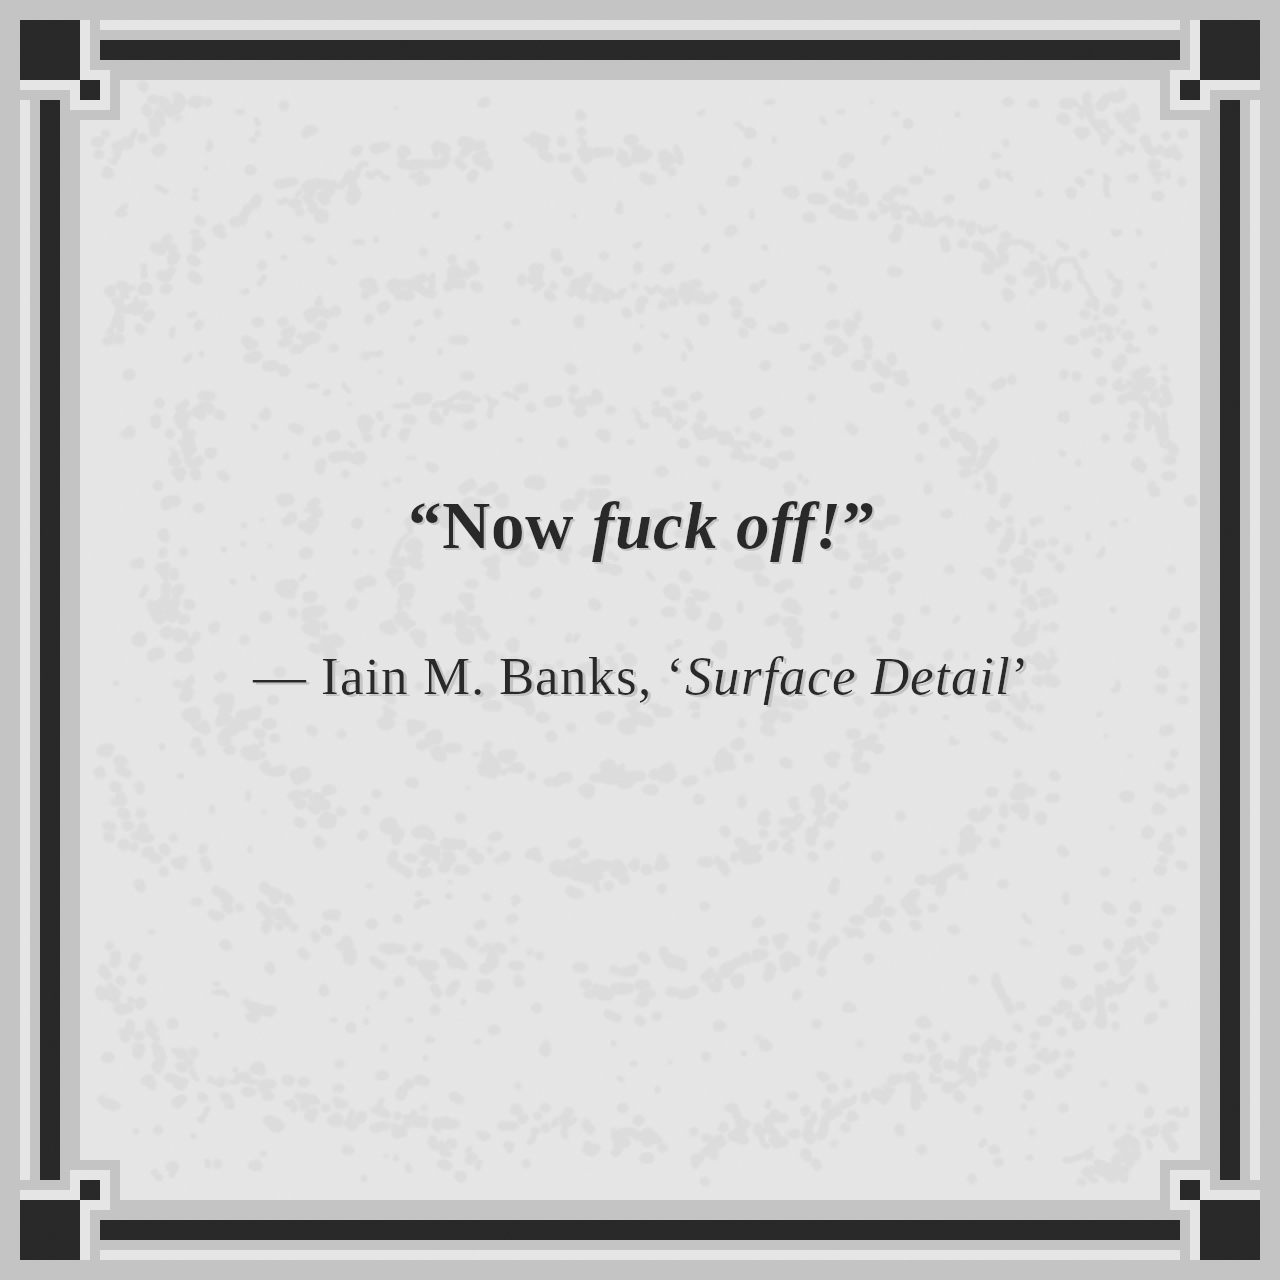 “Now fuck off!”

— Iain M. Banks, ‘Surface Detail’